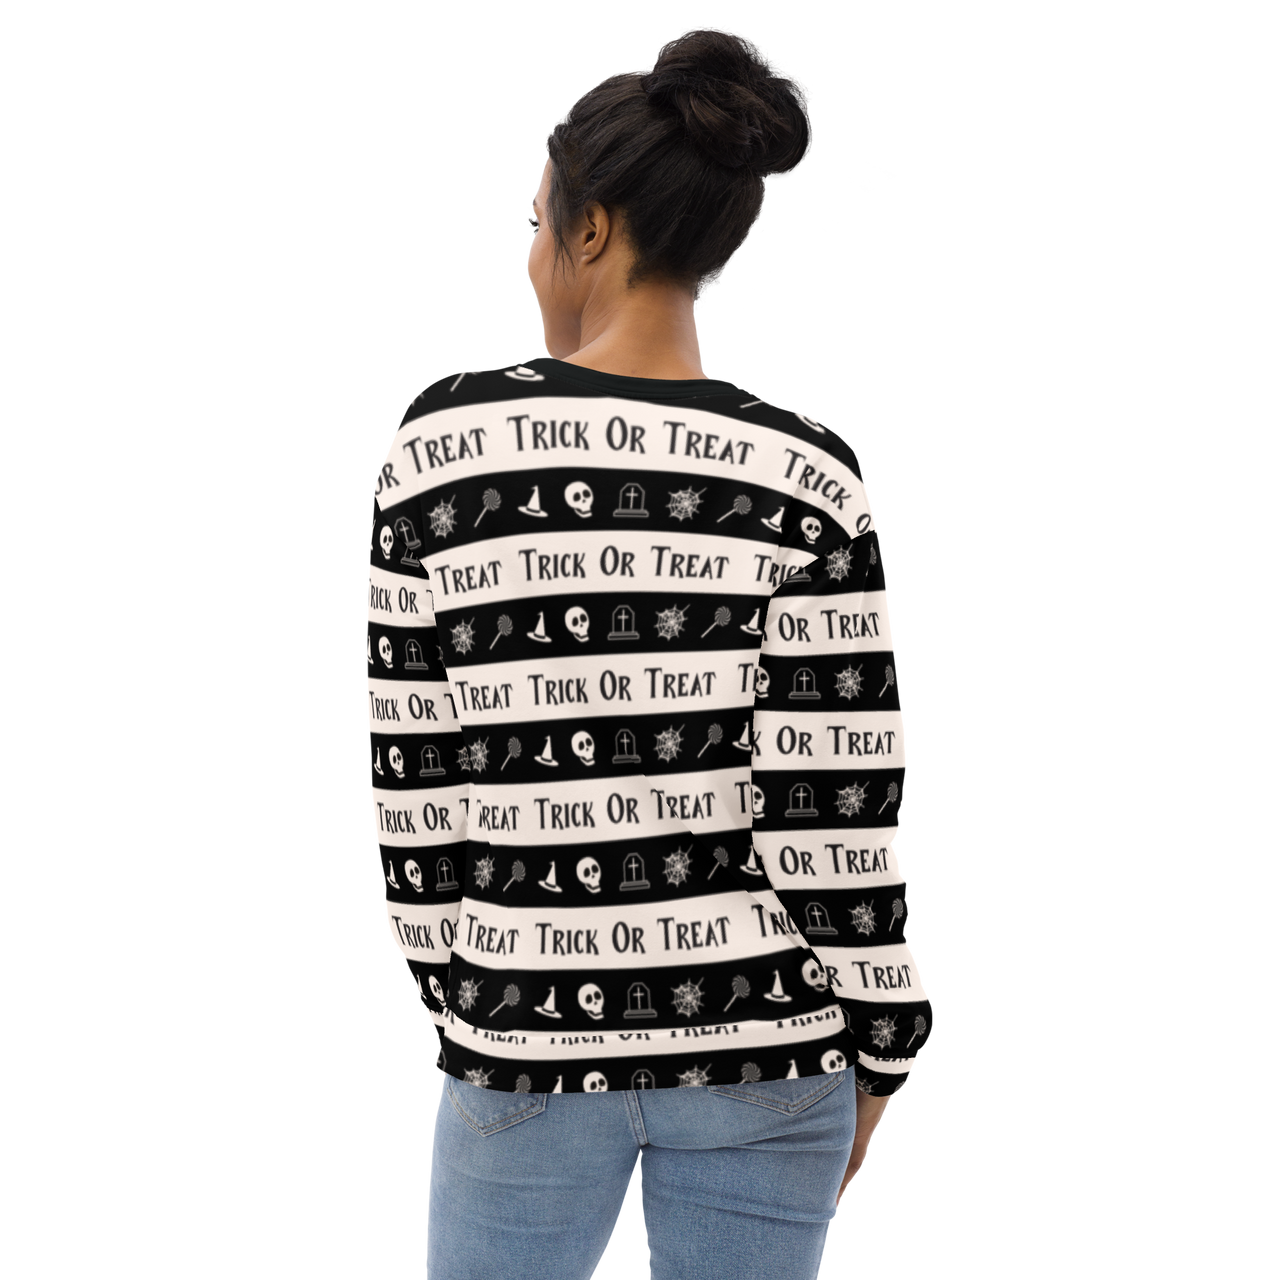 All over Unisex Halloween Sweater - Funny Halloween Sweatshirts - Unisex Halloween Sweatshirt For Halloween/Trick or Treat SHAVA